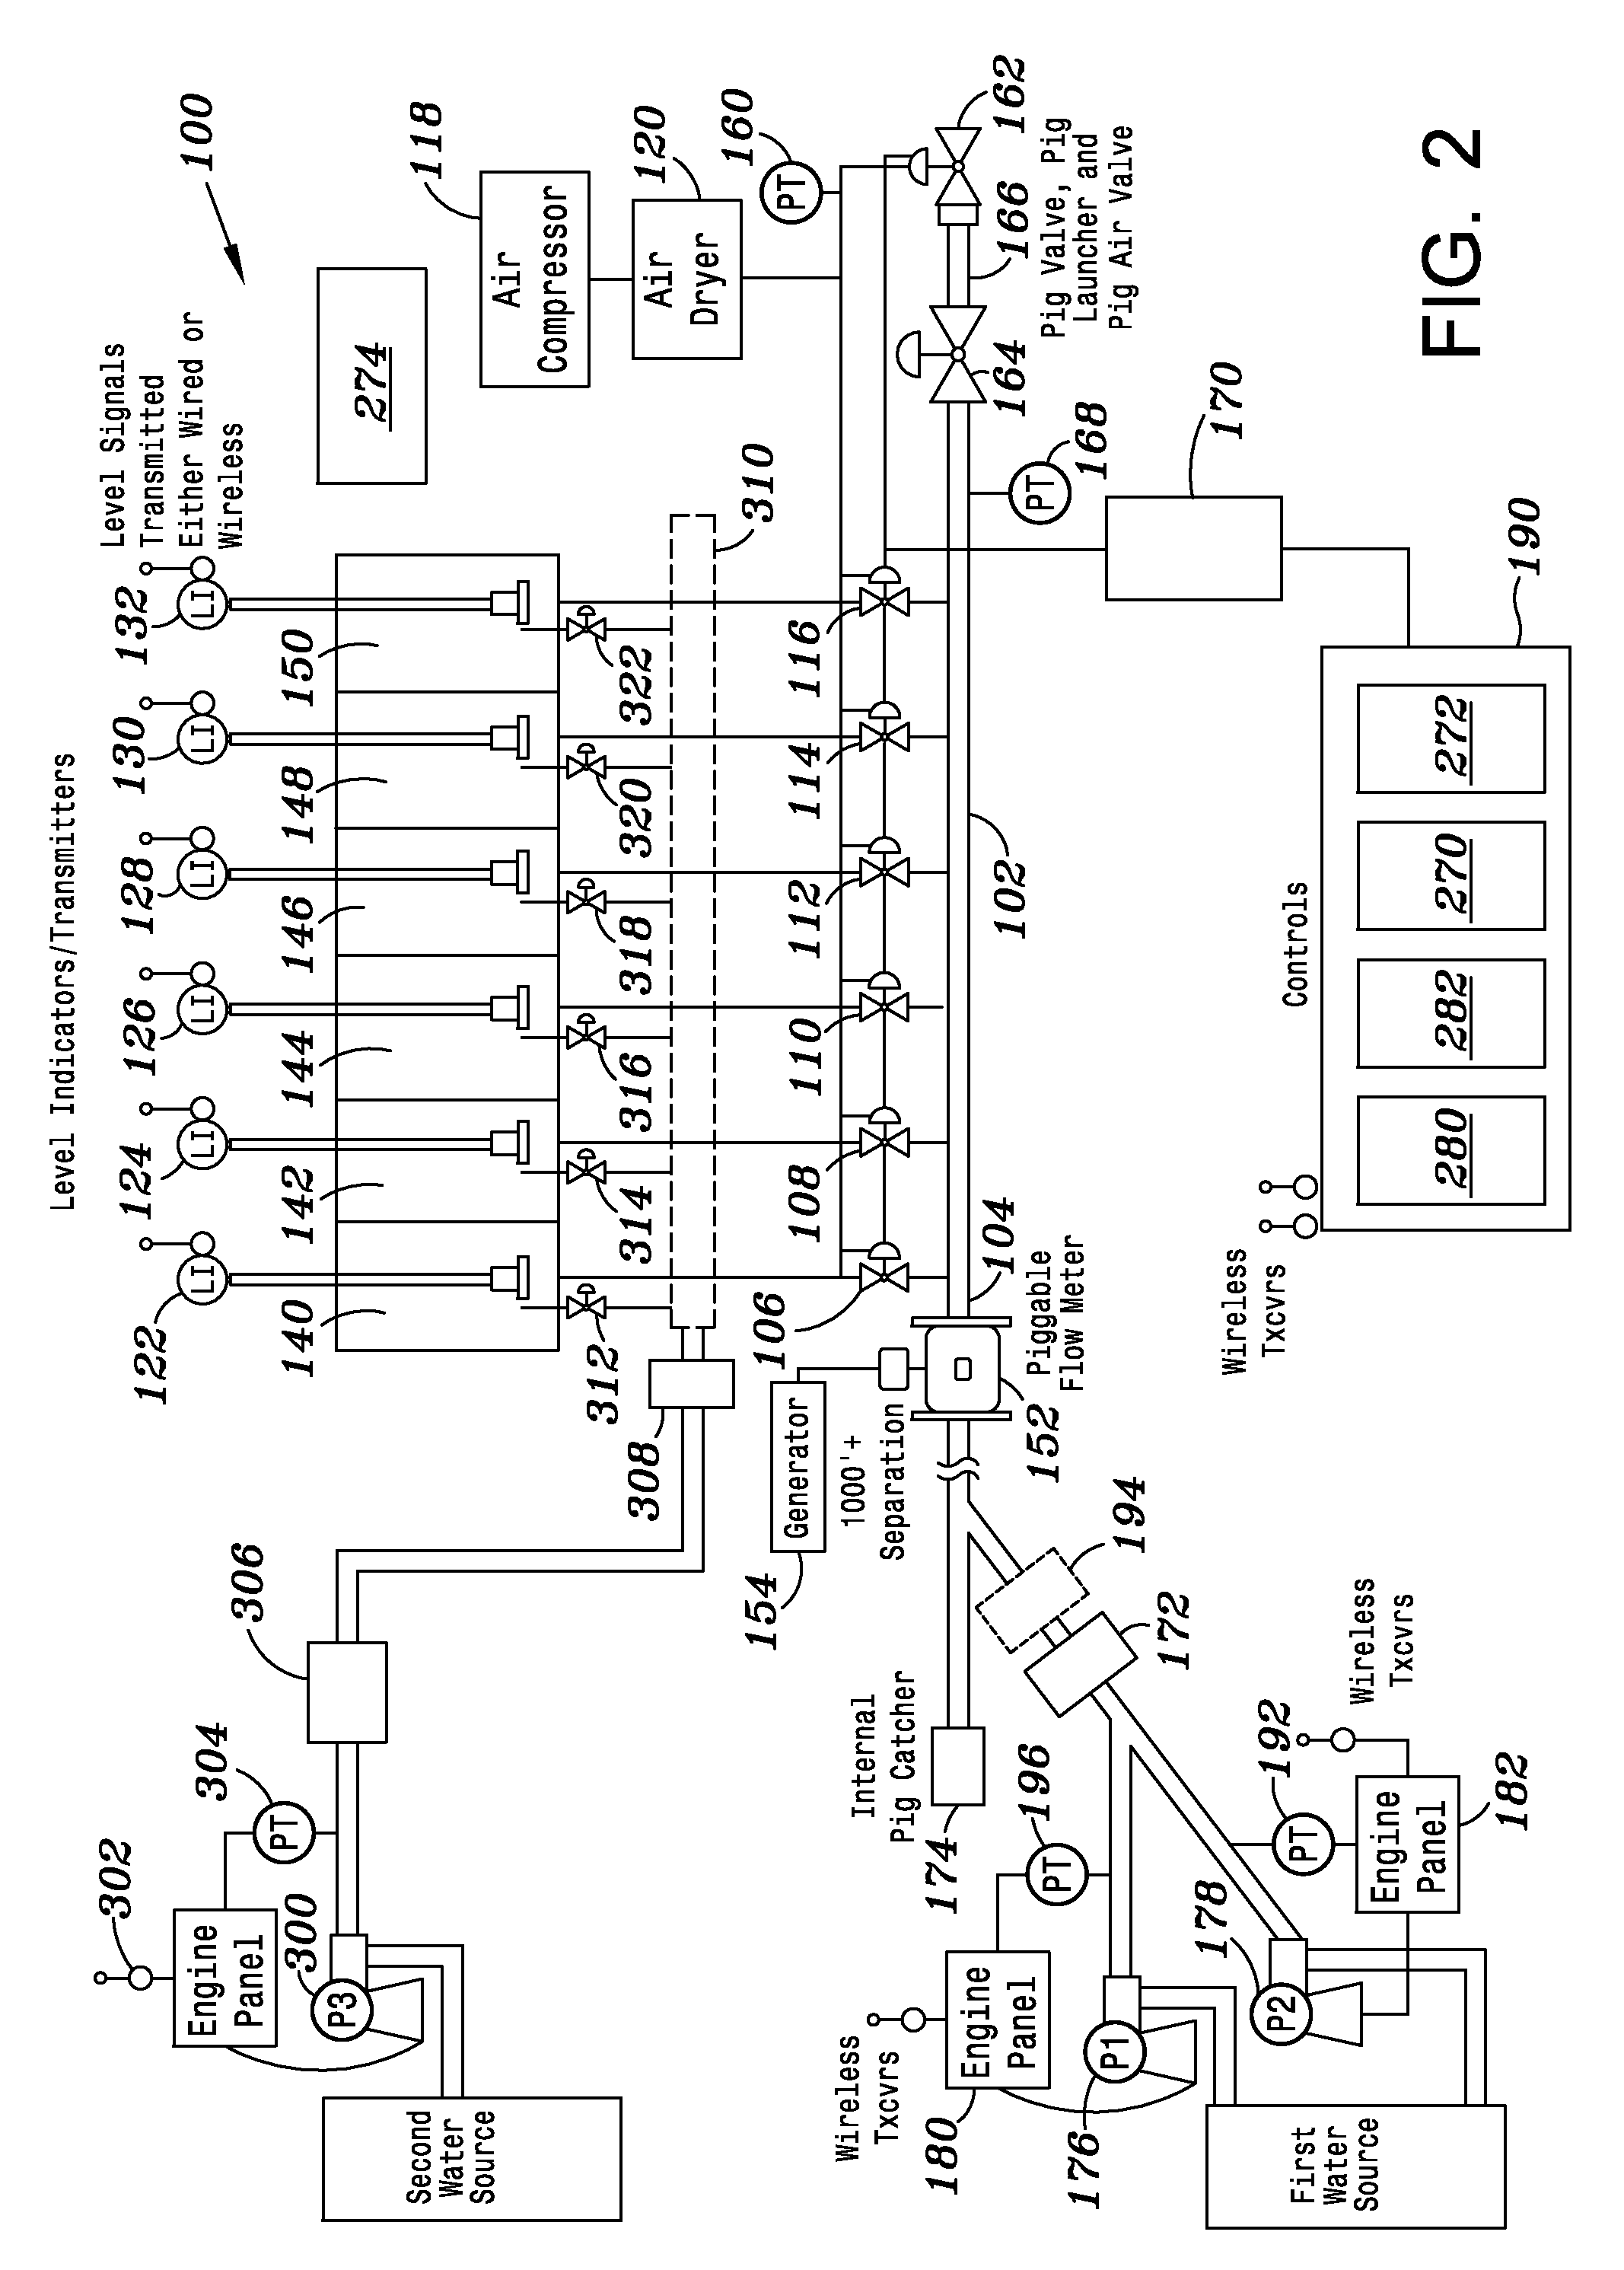 Automated system for monitoring and controlling water transfer during hydraulic fracturing